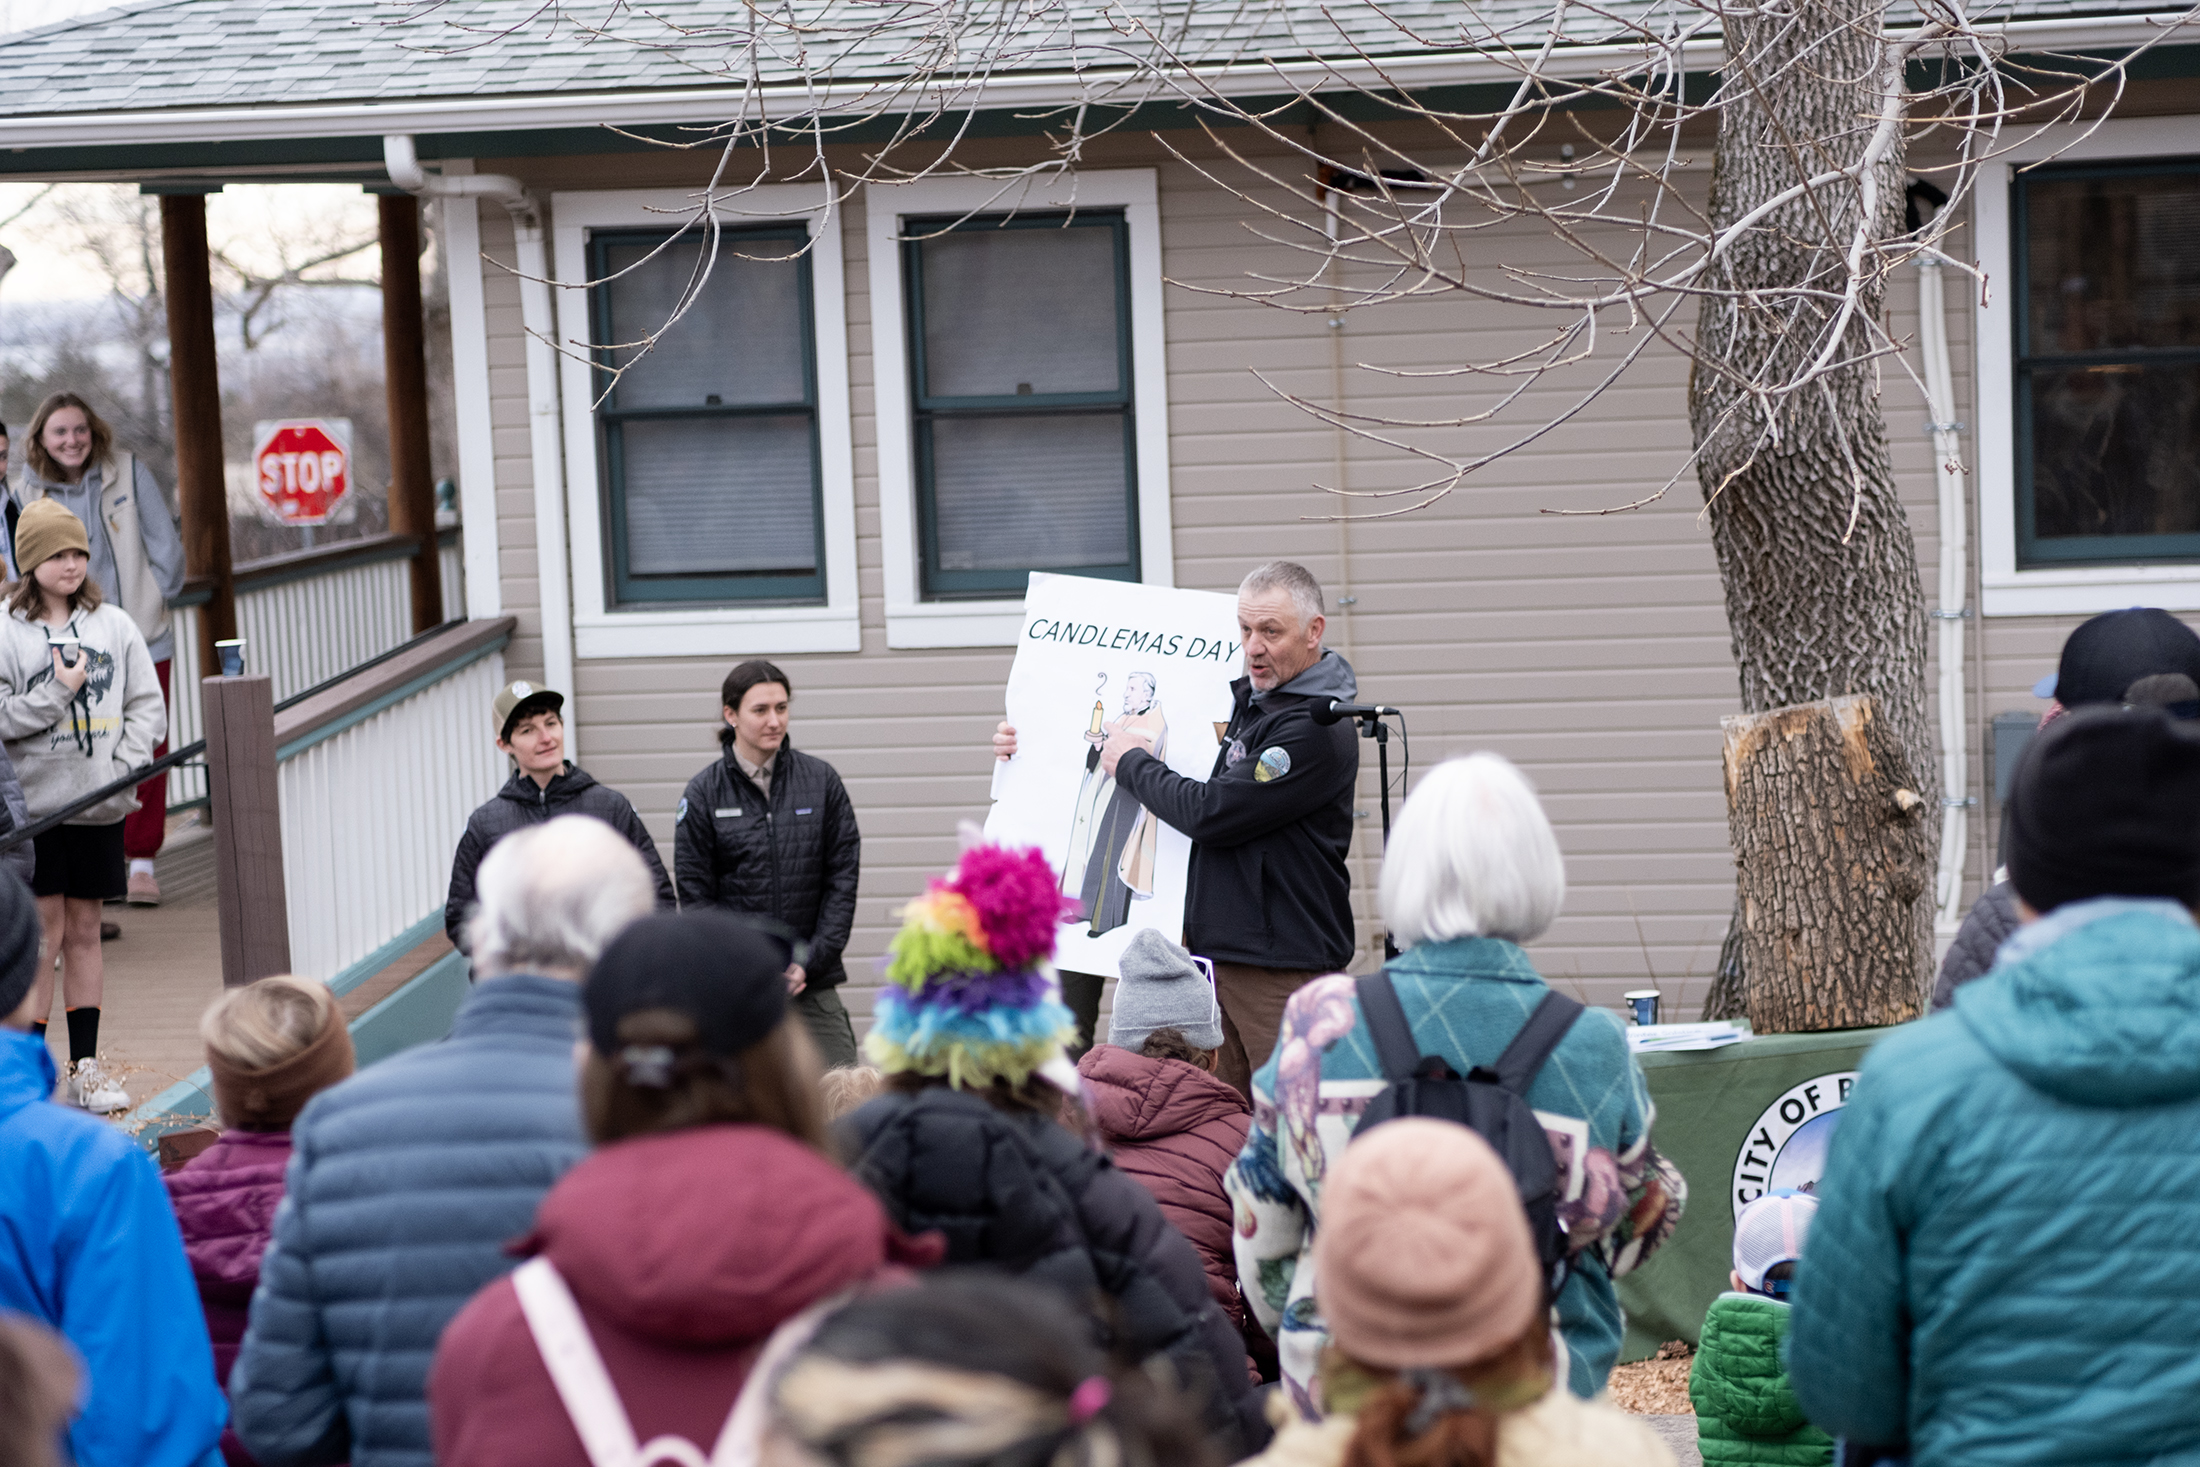 OSMP Rangers present information about Groundhog Day and Flatiron Freddy